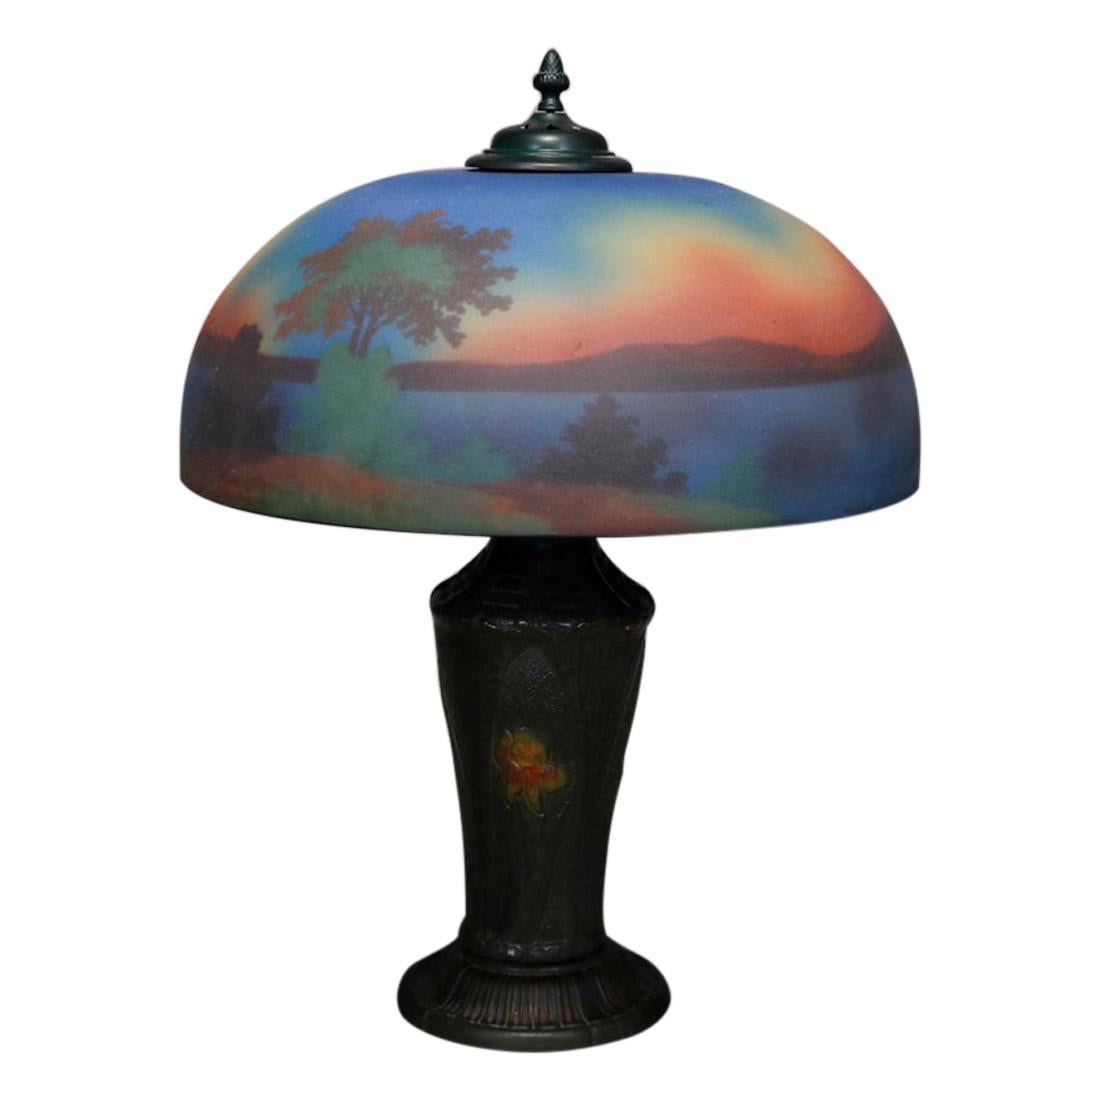 Antique Arts & Crafts Pittsburgh Style Reverse Painted & Polychromed Lamp, c1920